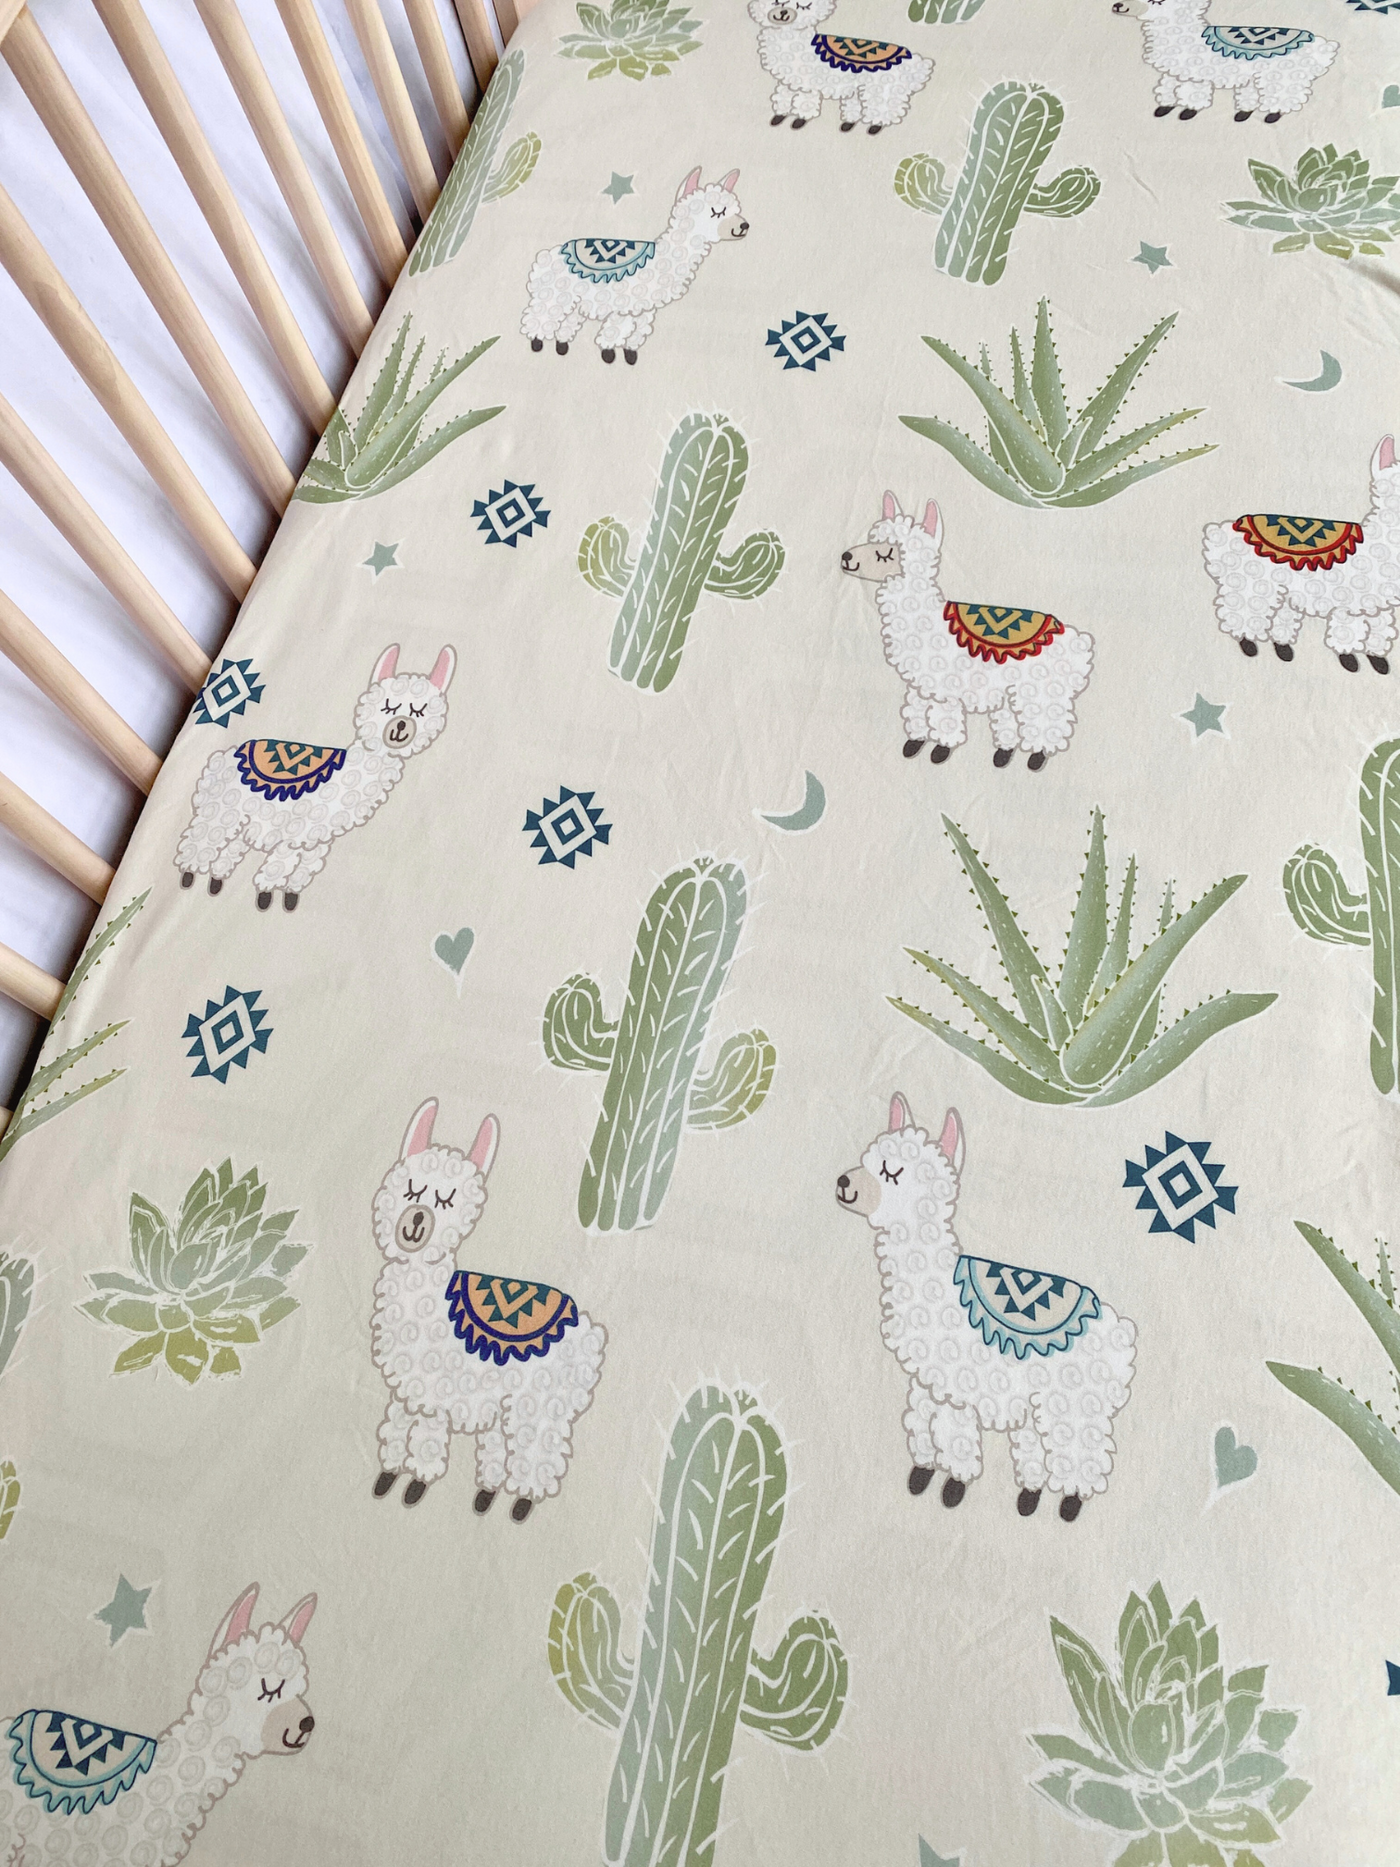 Fitted cotton sheet for bassinet : Sleeping Lama (Cream Background)